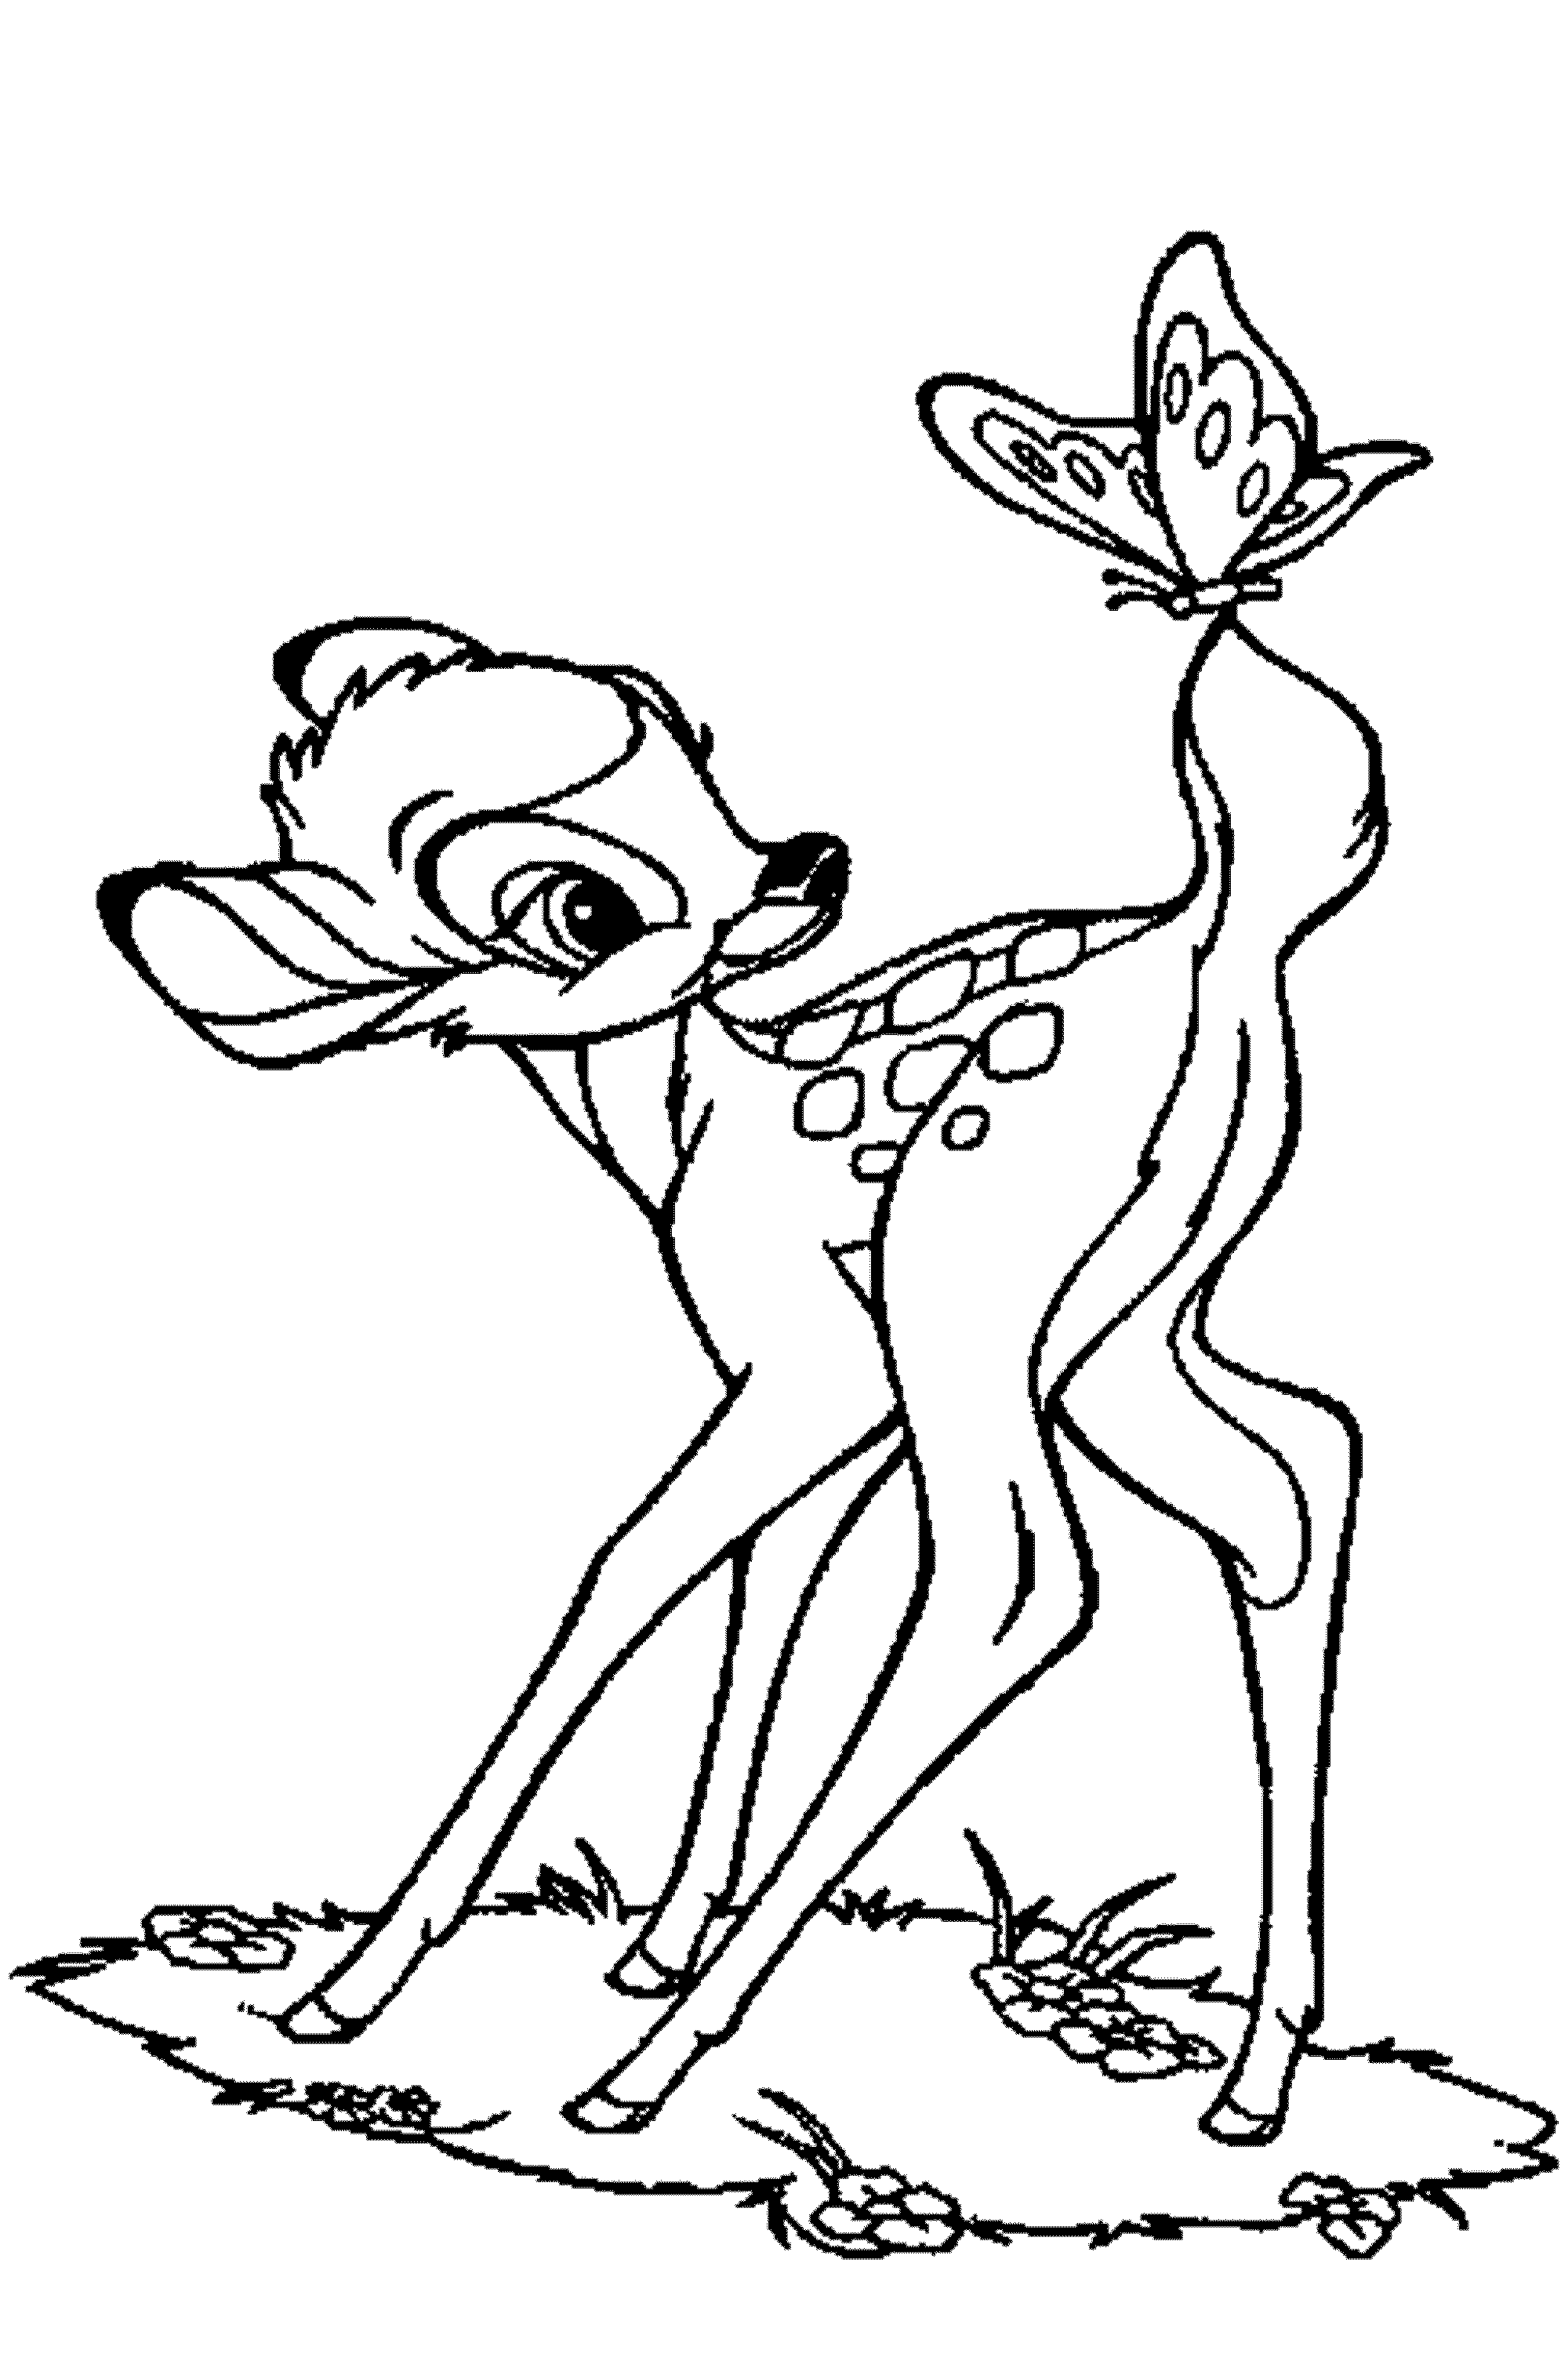 Download Baby Deer Coloring Page - Coloring Home